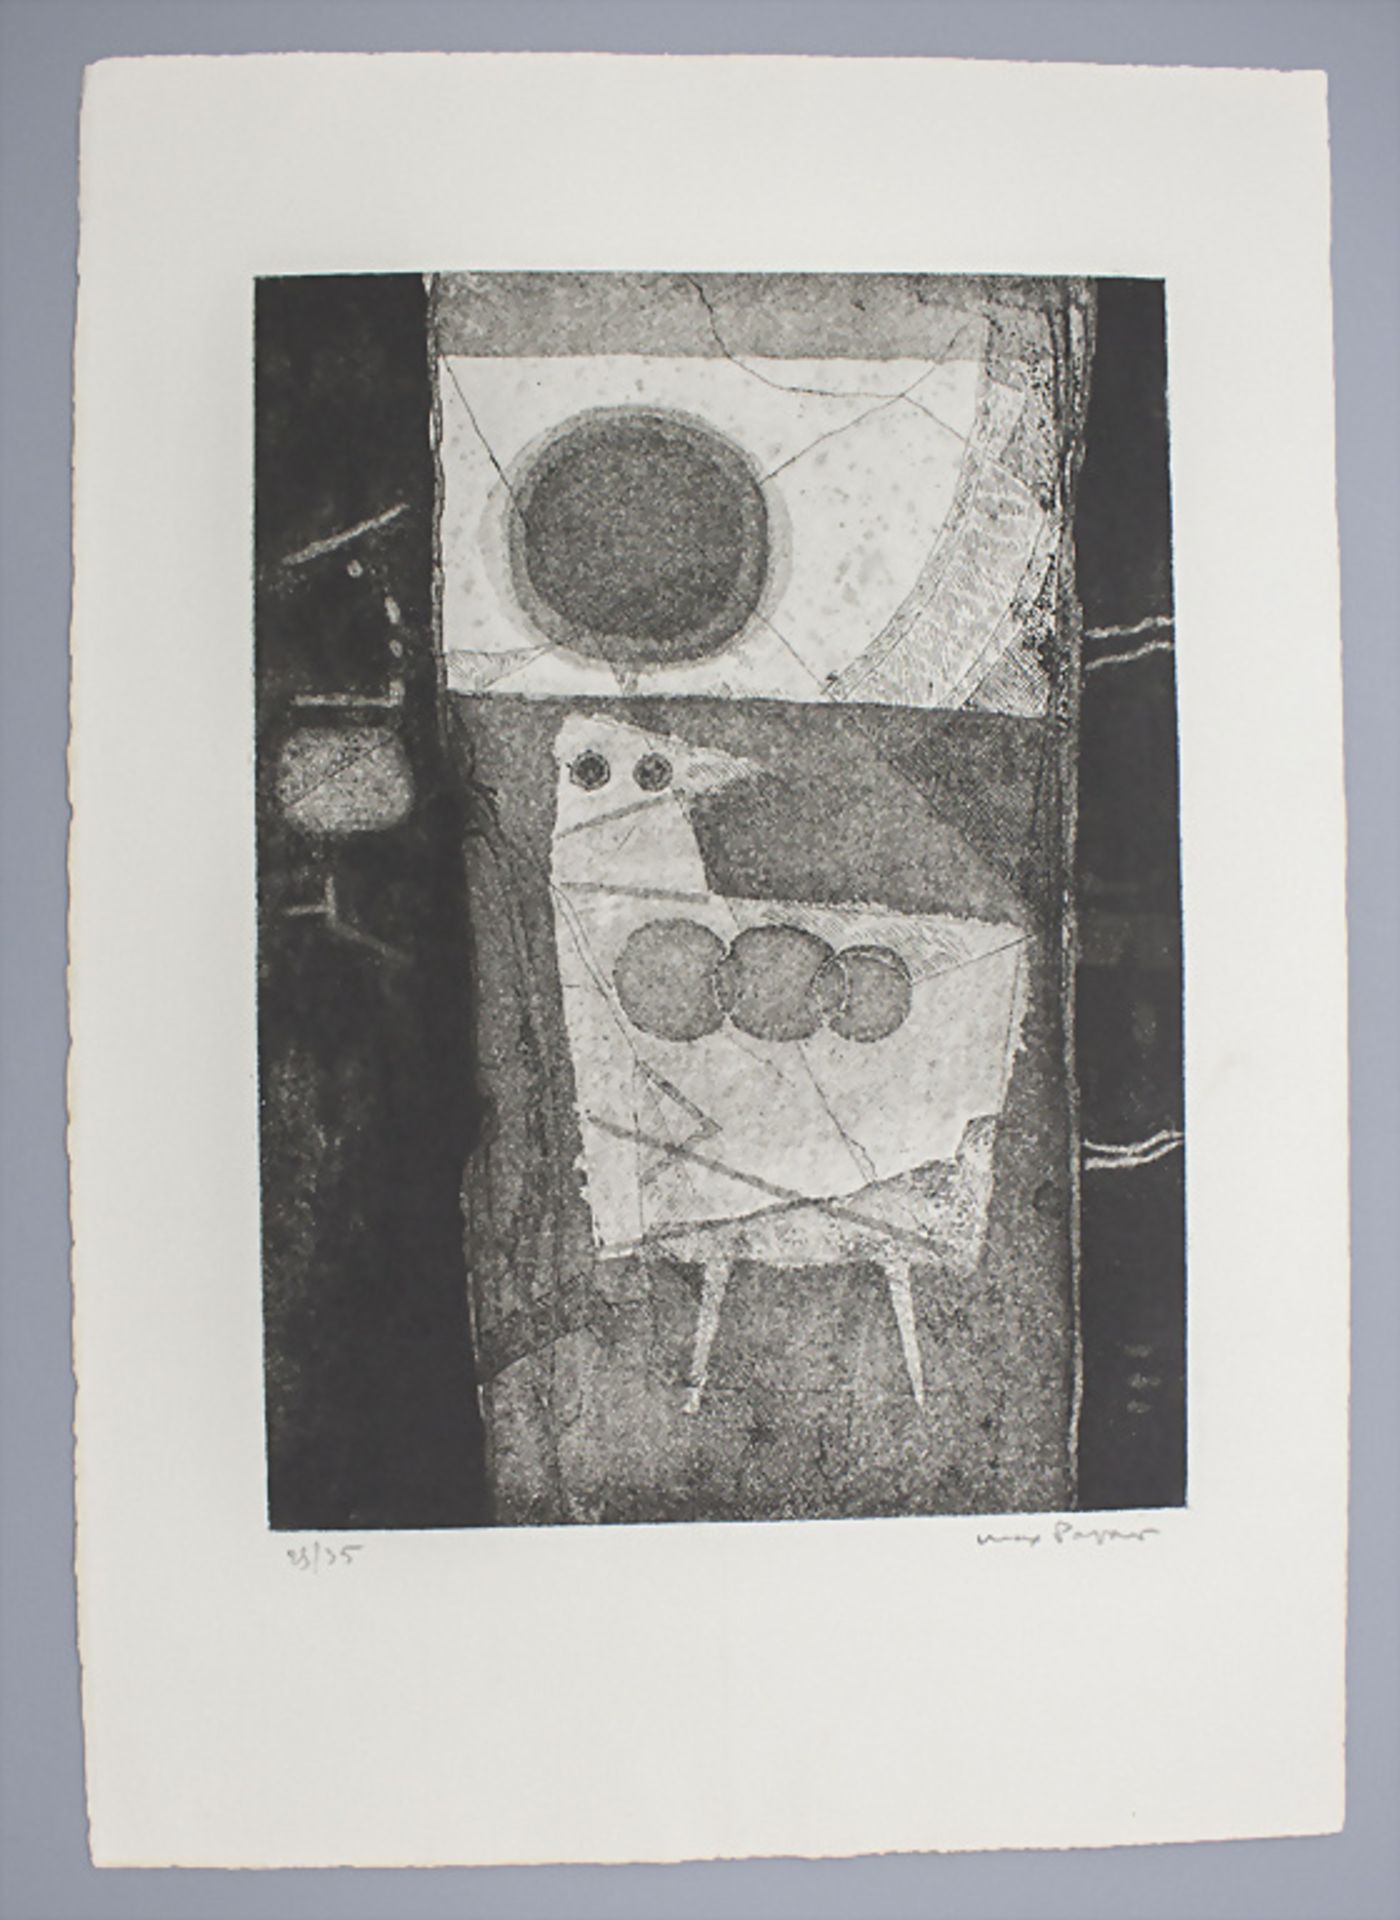 Max PAPART (1911-1994), 'Tier mit Himmelskörper' / 'Animal with celestial body, 20. Jh.' - Image 2 of 5